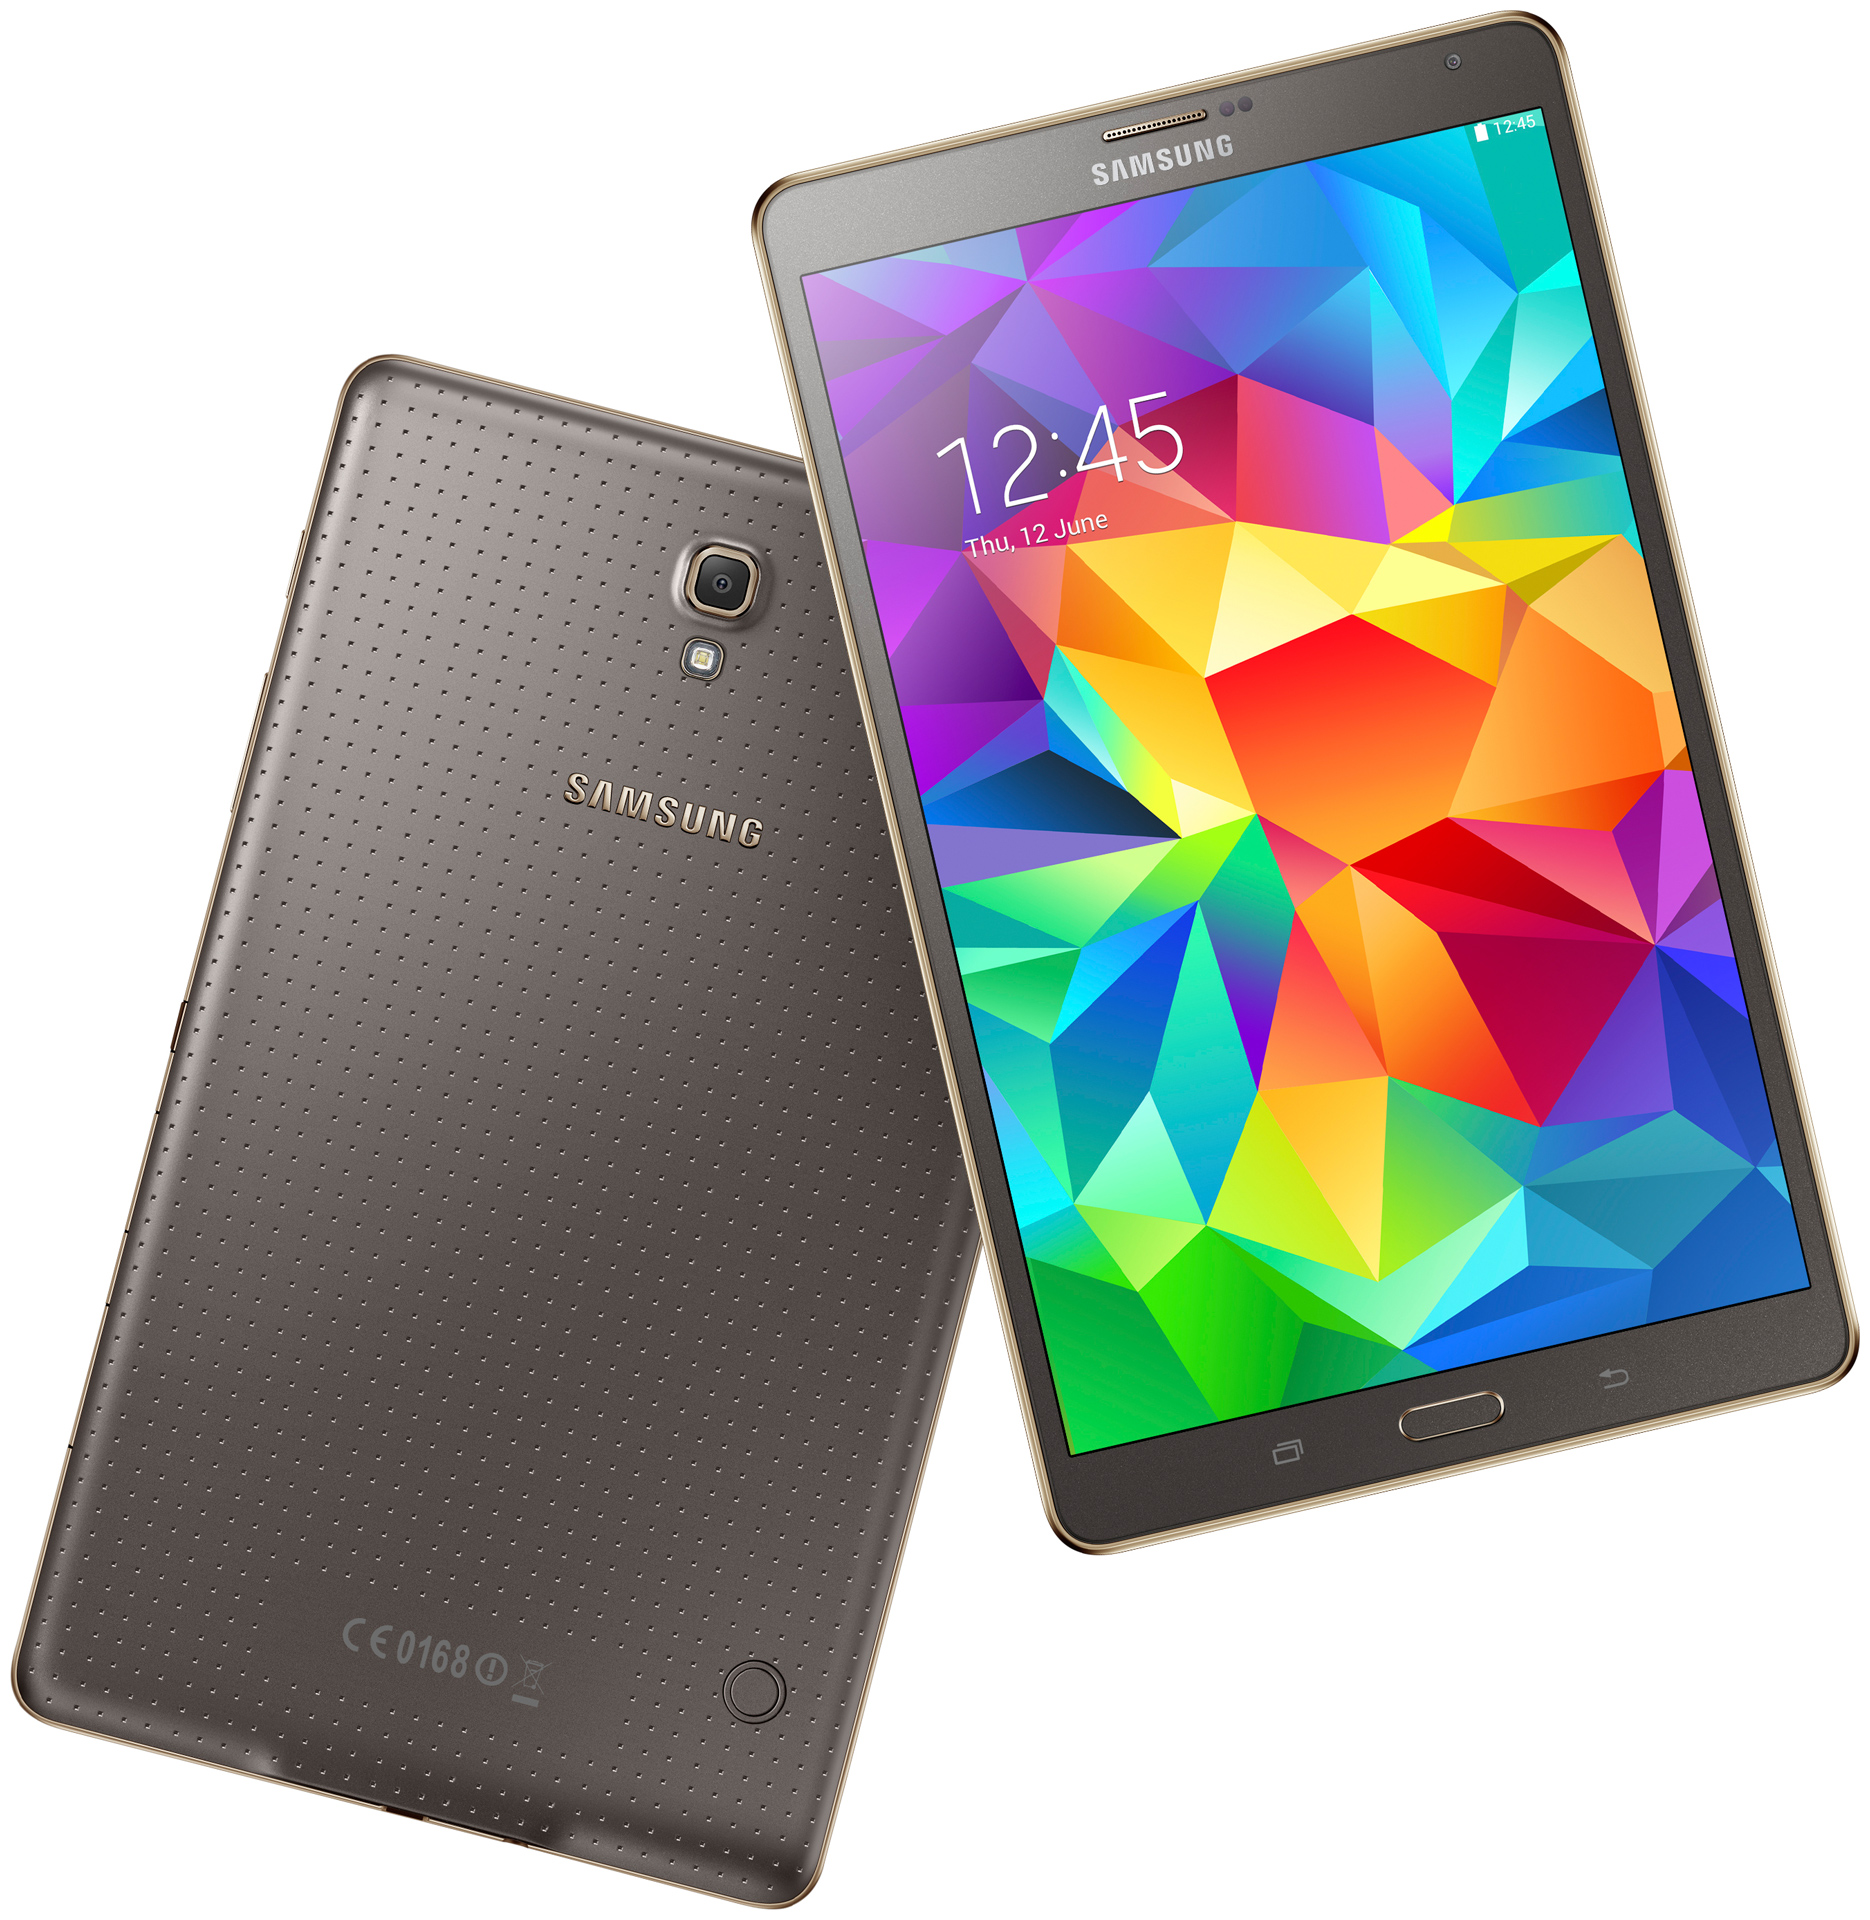 Tablette tactile Samsung Galaxy Tab S 8.4" 16 Go - Tablette Darty